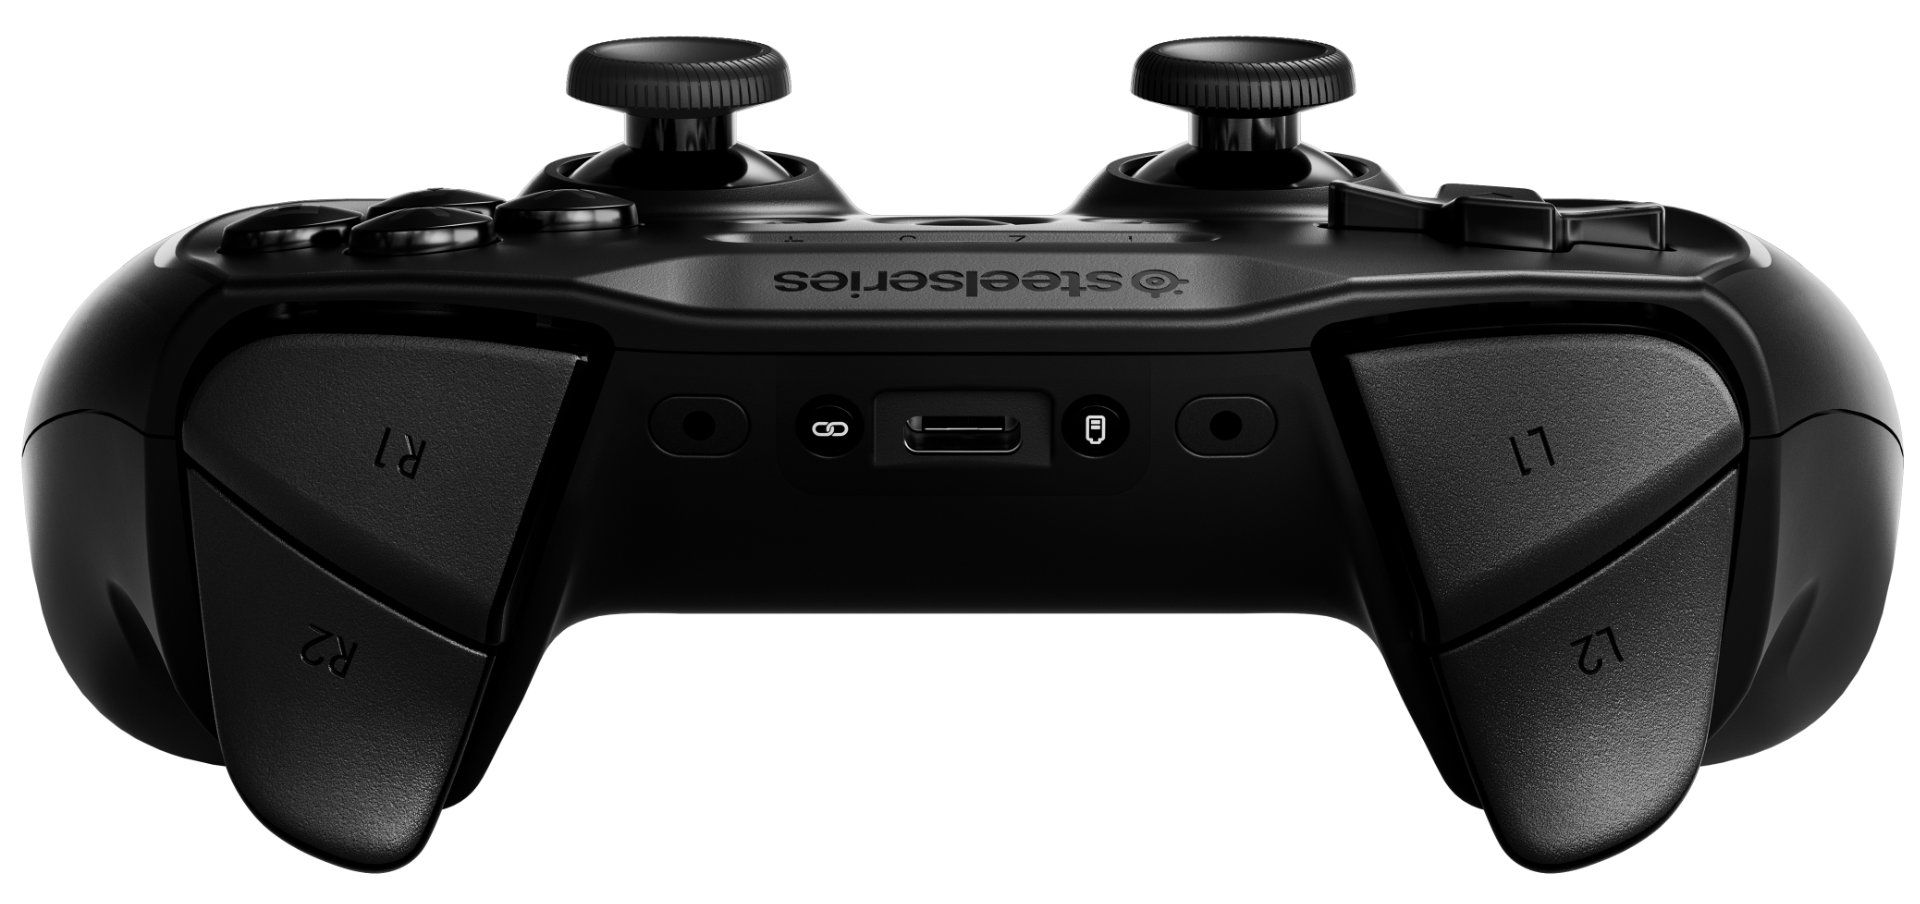 A close-up of the SteelSeries Stratus+ controller triggers